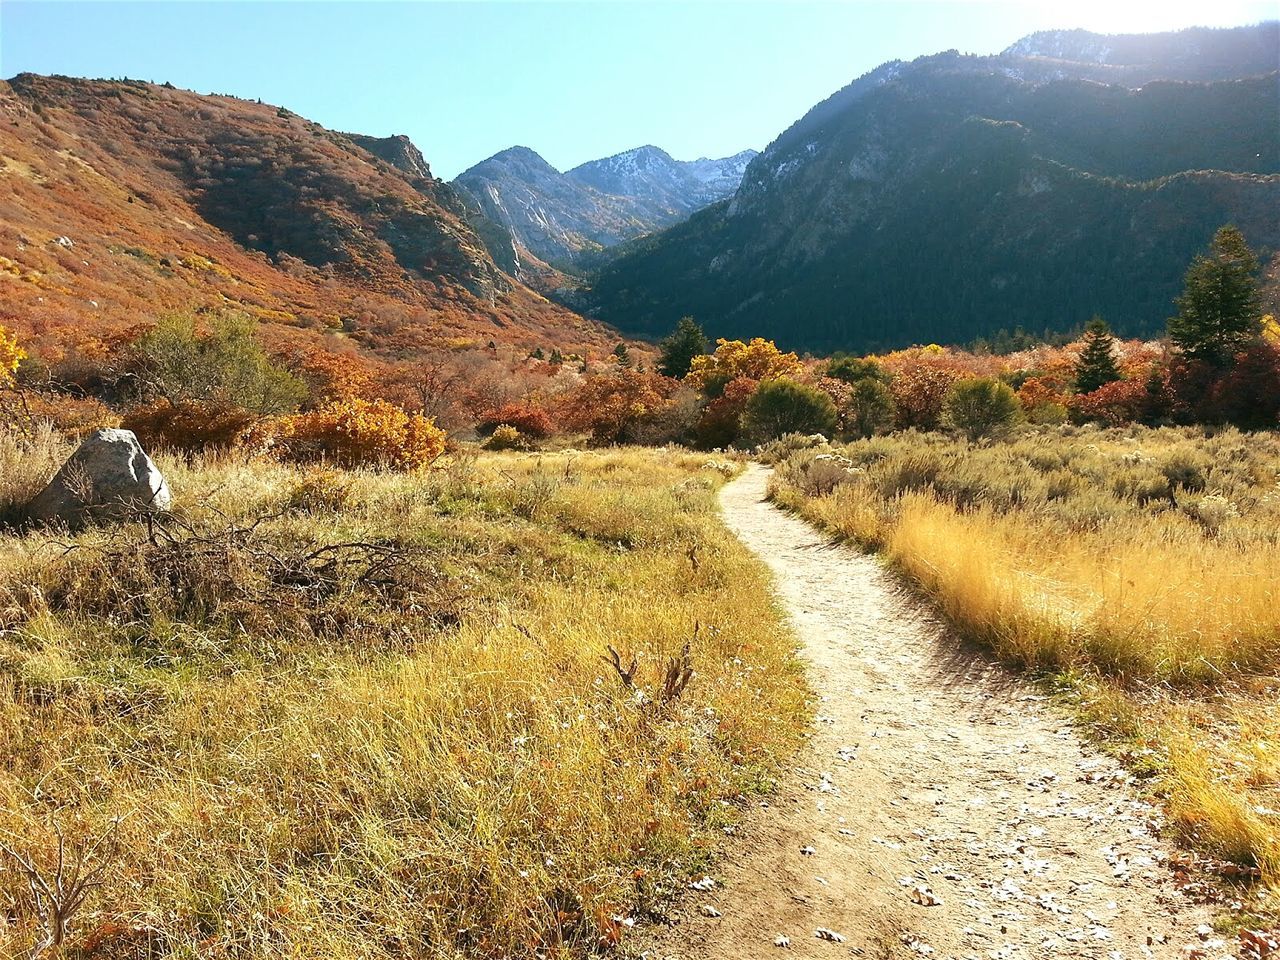 Pathway leading towards wasatch mountains